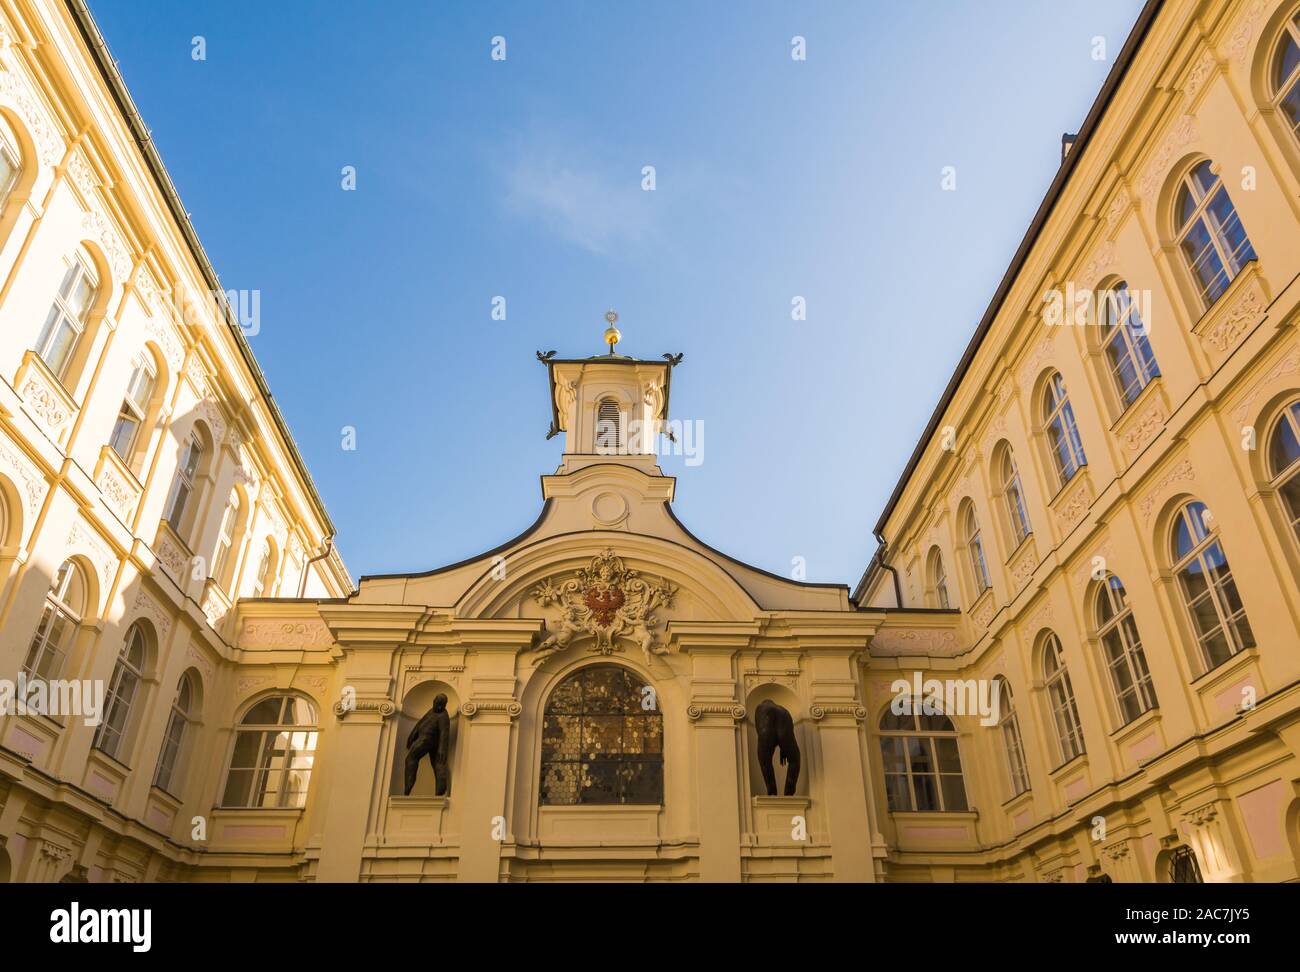 Facade and details of The Baroque 'Alte Landhaus' . The building is located on Maria Theresien Street in the centre of Innsbruck, Austria, Europe. A B Stock Photo